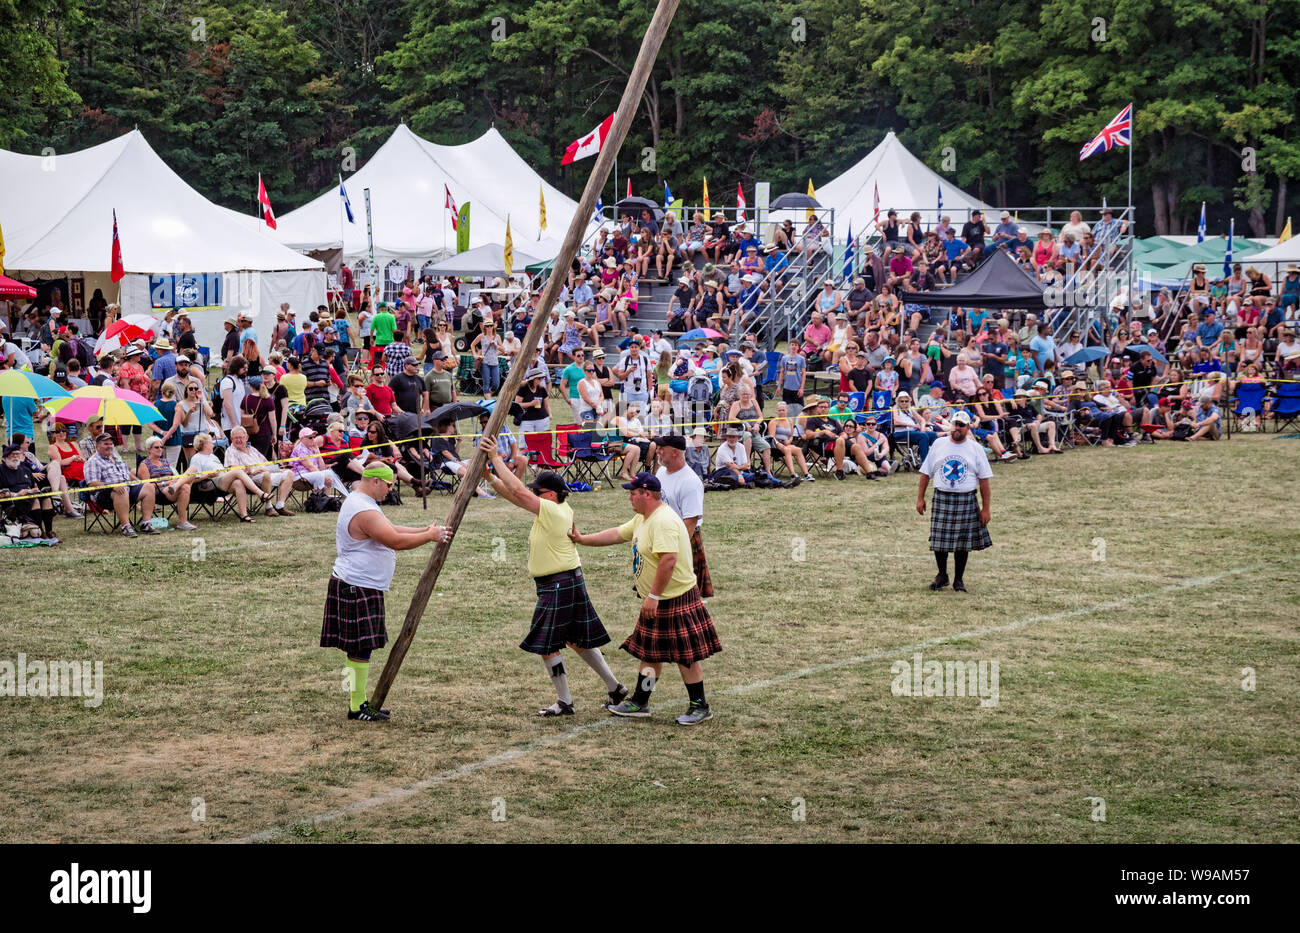 Fergus, Ontario, Canada - 08 11 2018: Traditional Scottish heavies competitions athletes wearing kilts are preparing to demonstrate their skills in a Stock Photo